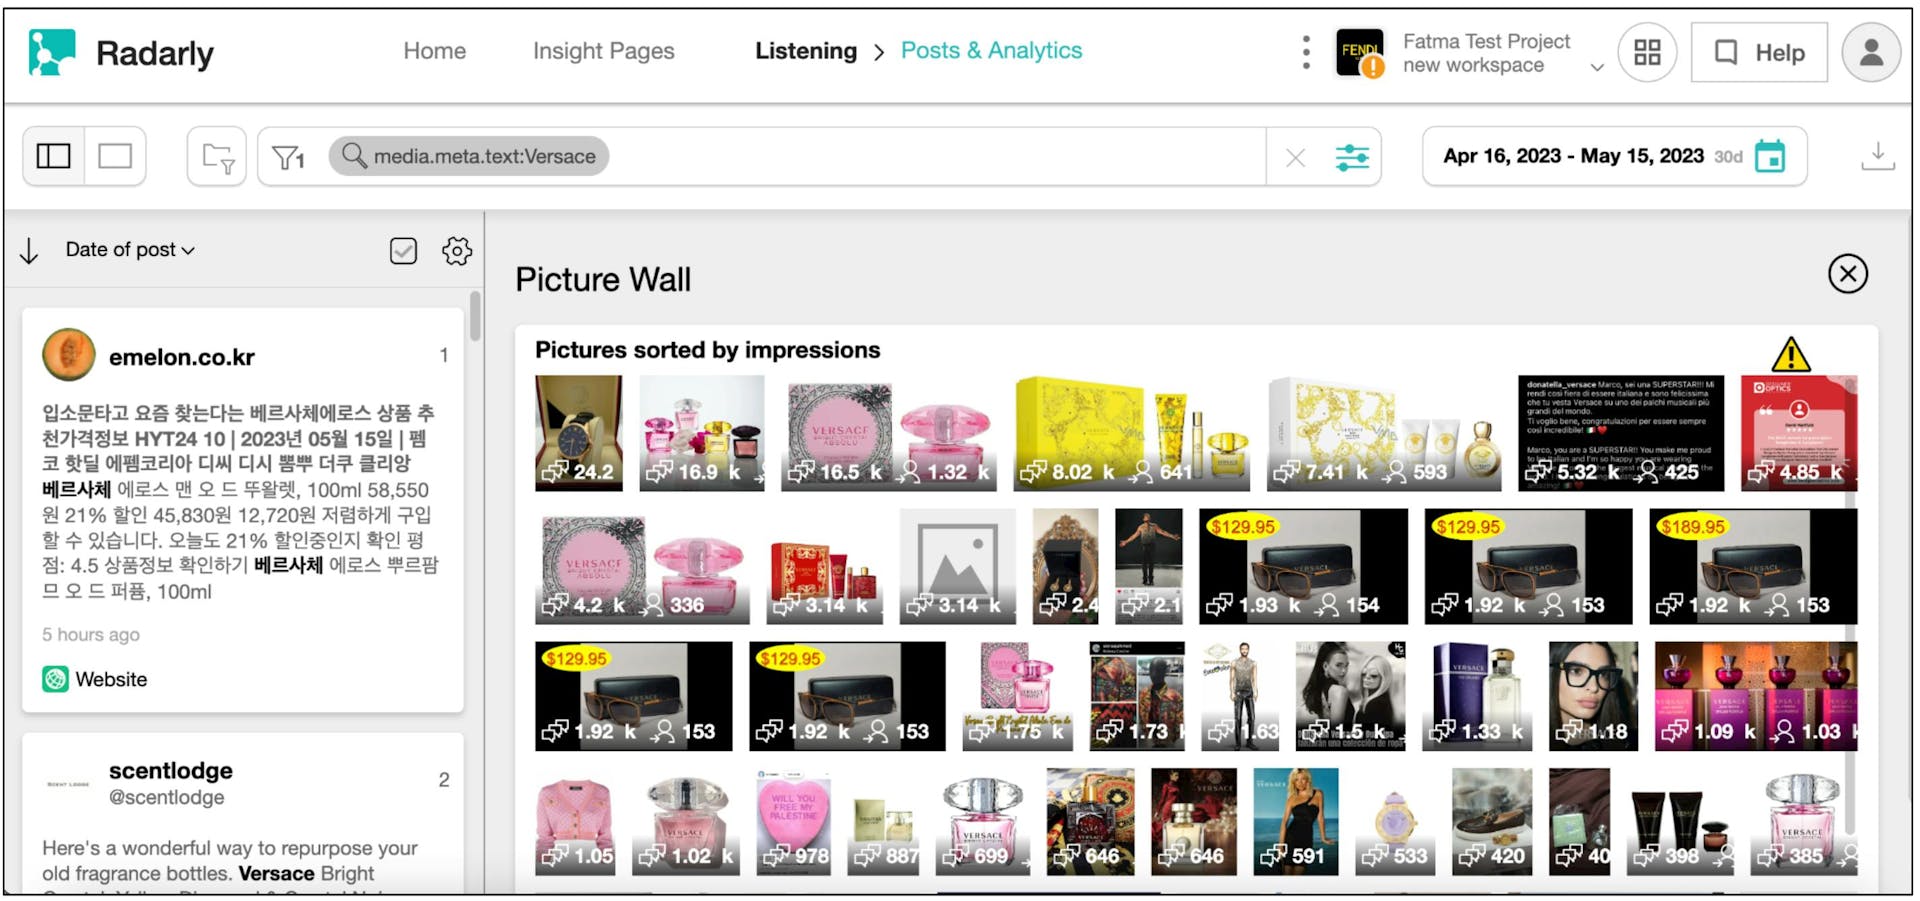 Radarly: Textual search in images